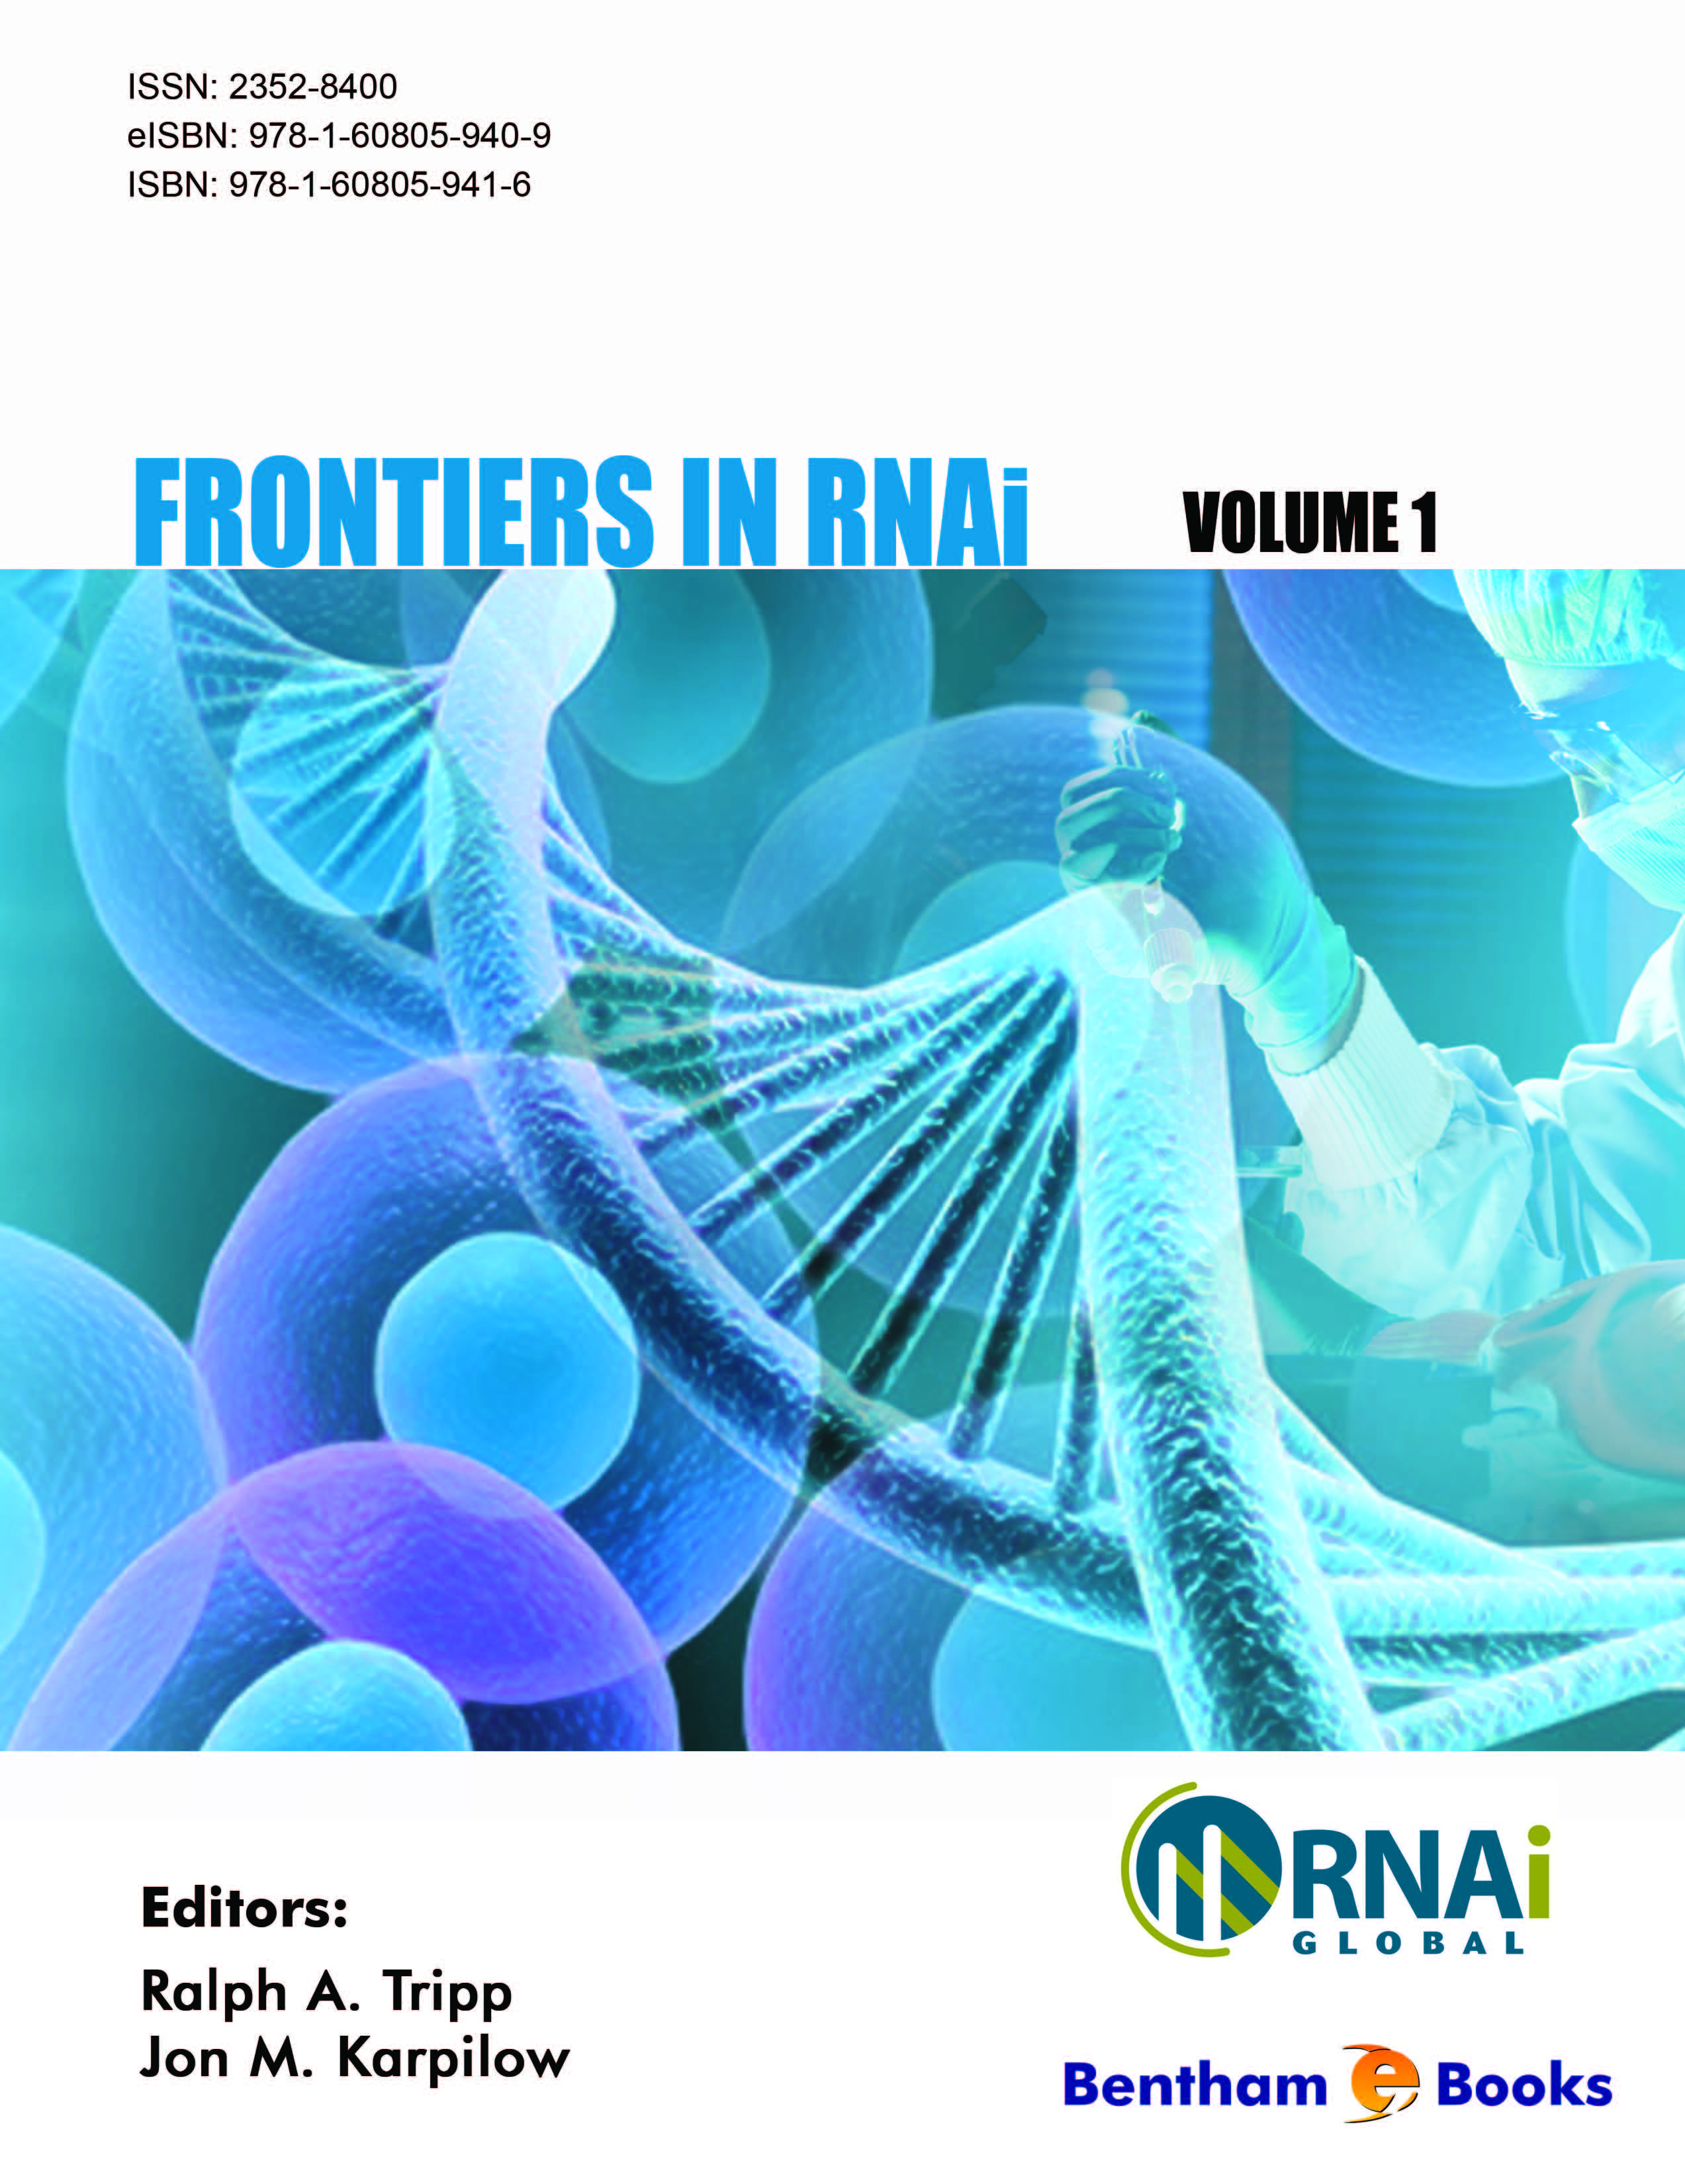 Frontiers in RNAi